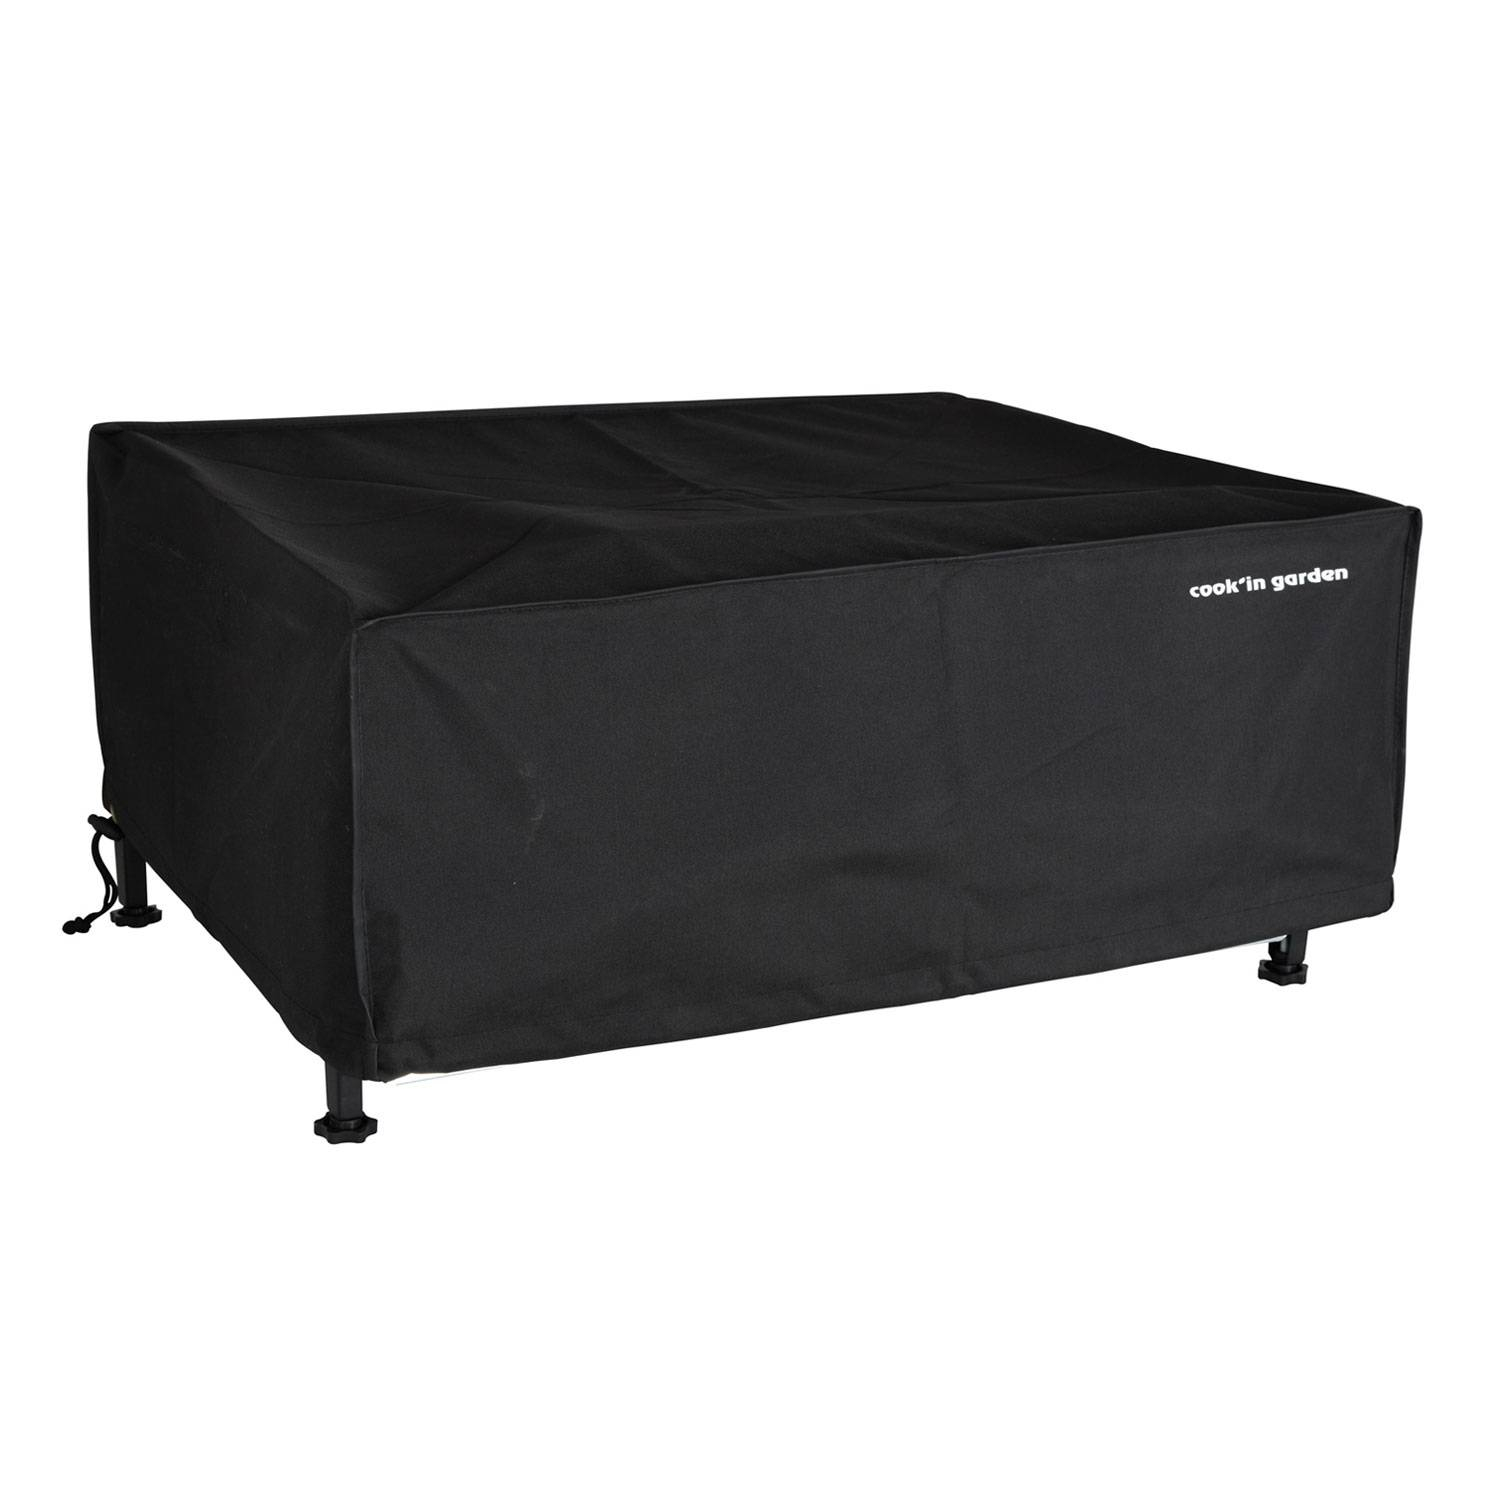 Housse de protection polyester barbecue / plancha taille M